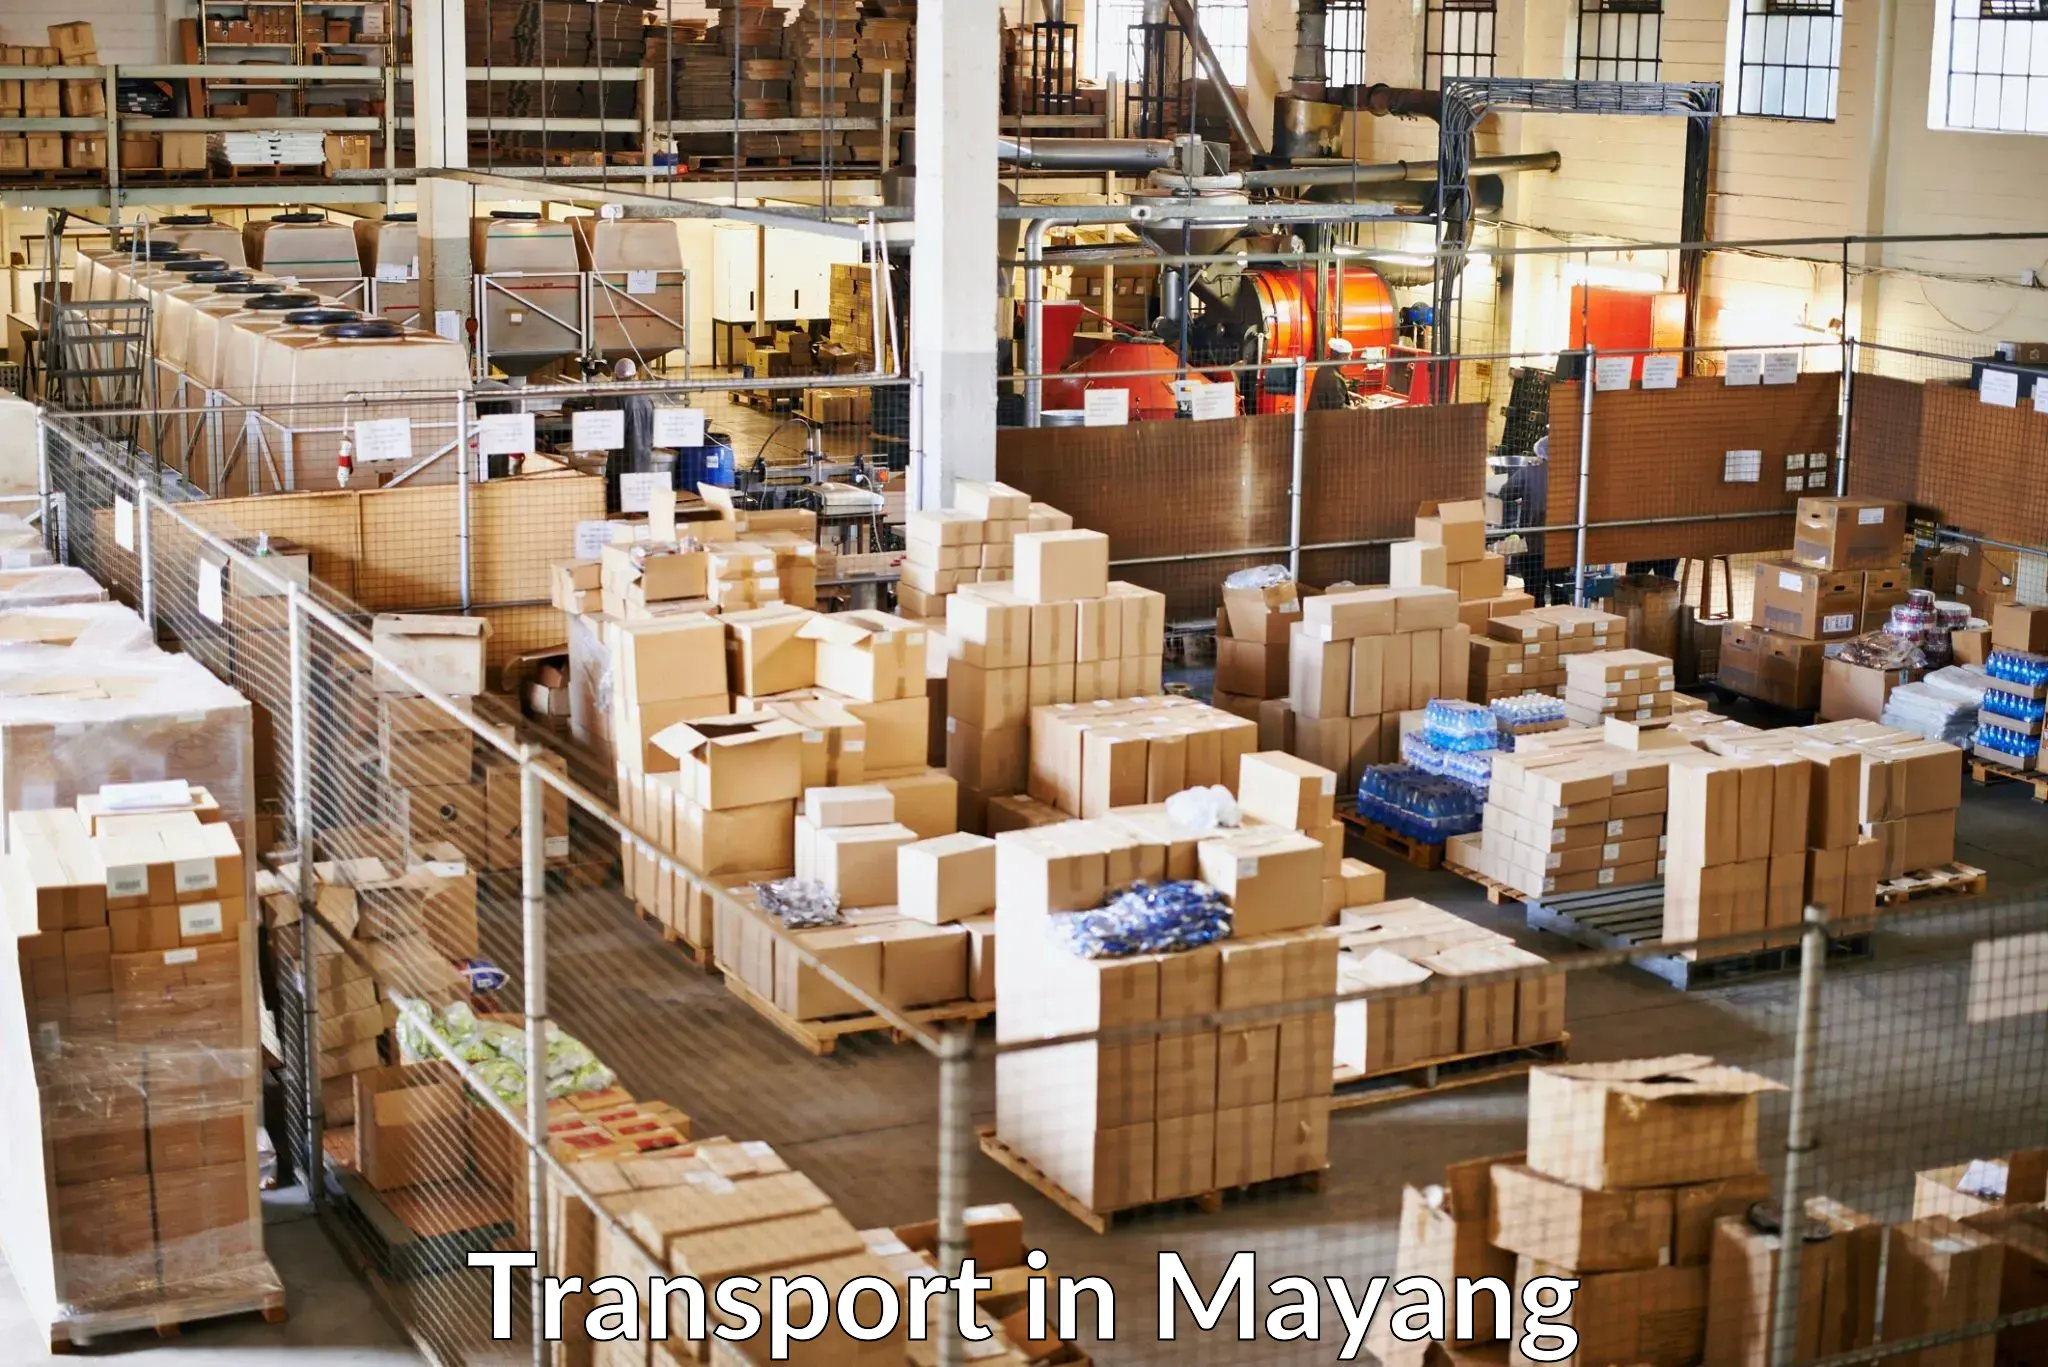 Domestic transport services in Mayang